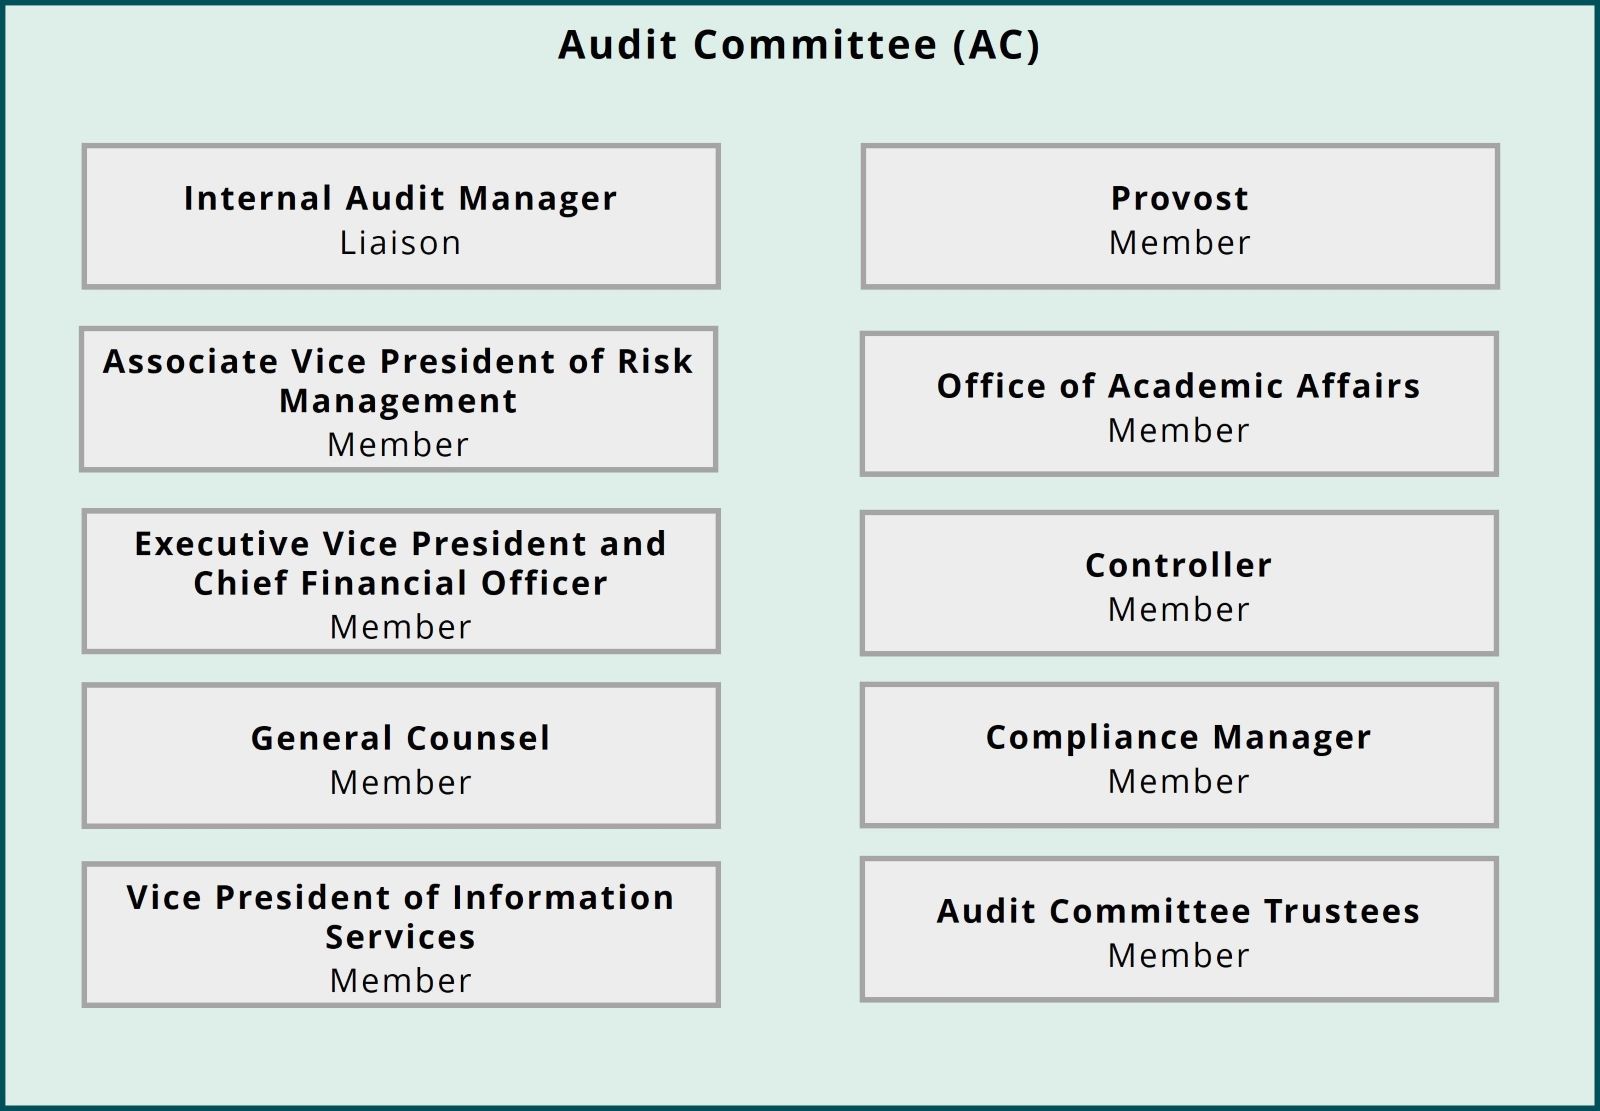 The members of the Audit Committee